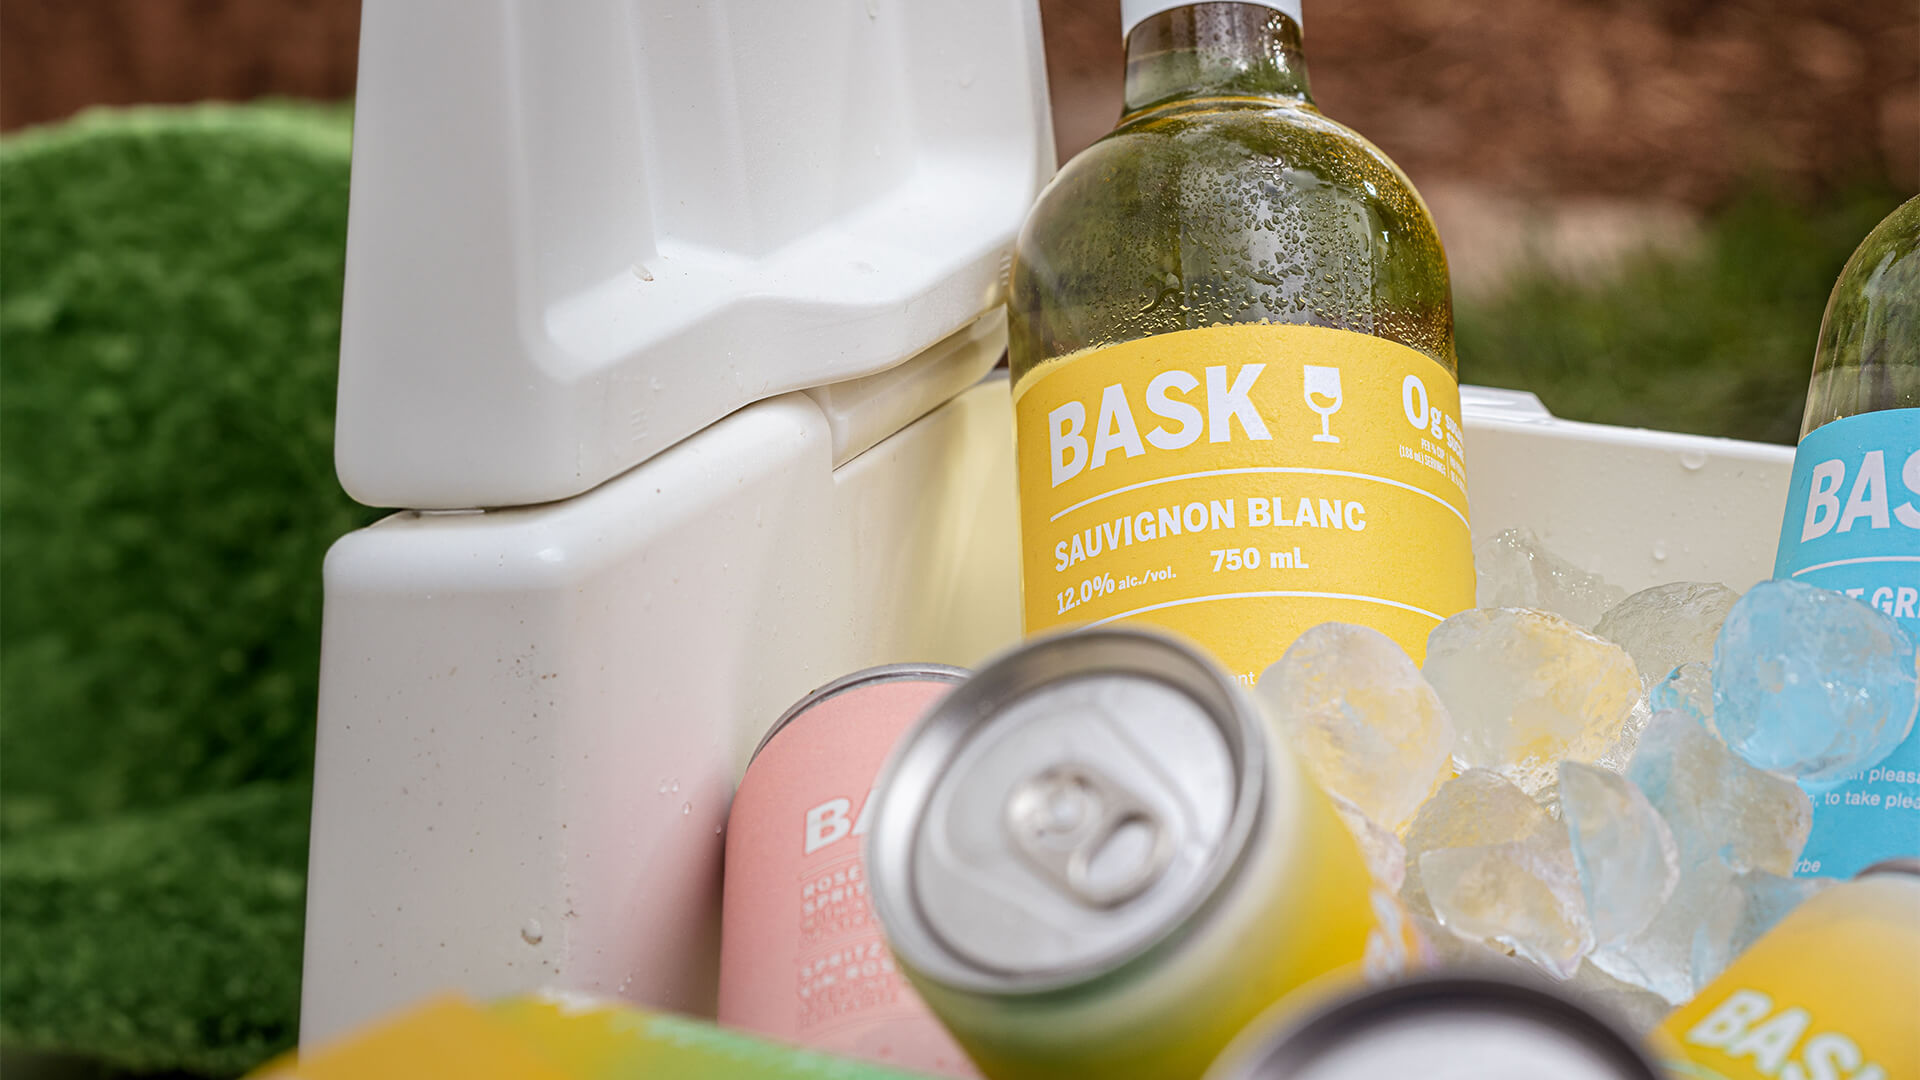 Cooler filled with bottles and cans of BASK wines.